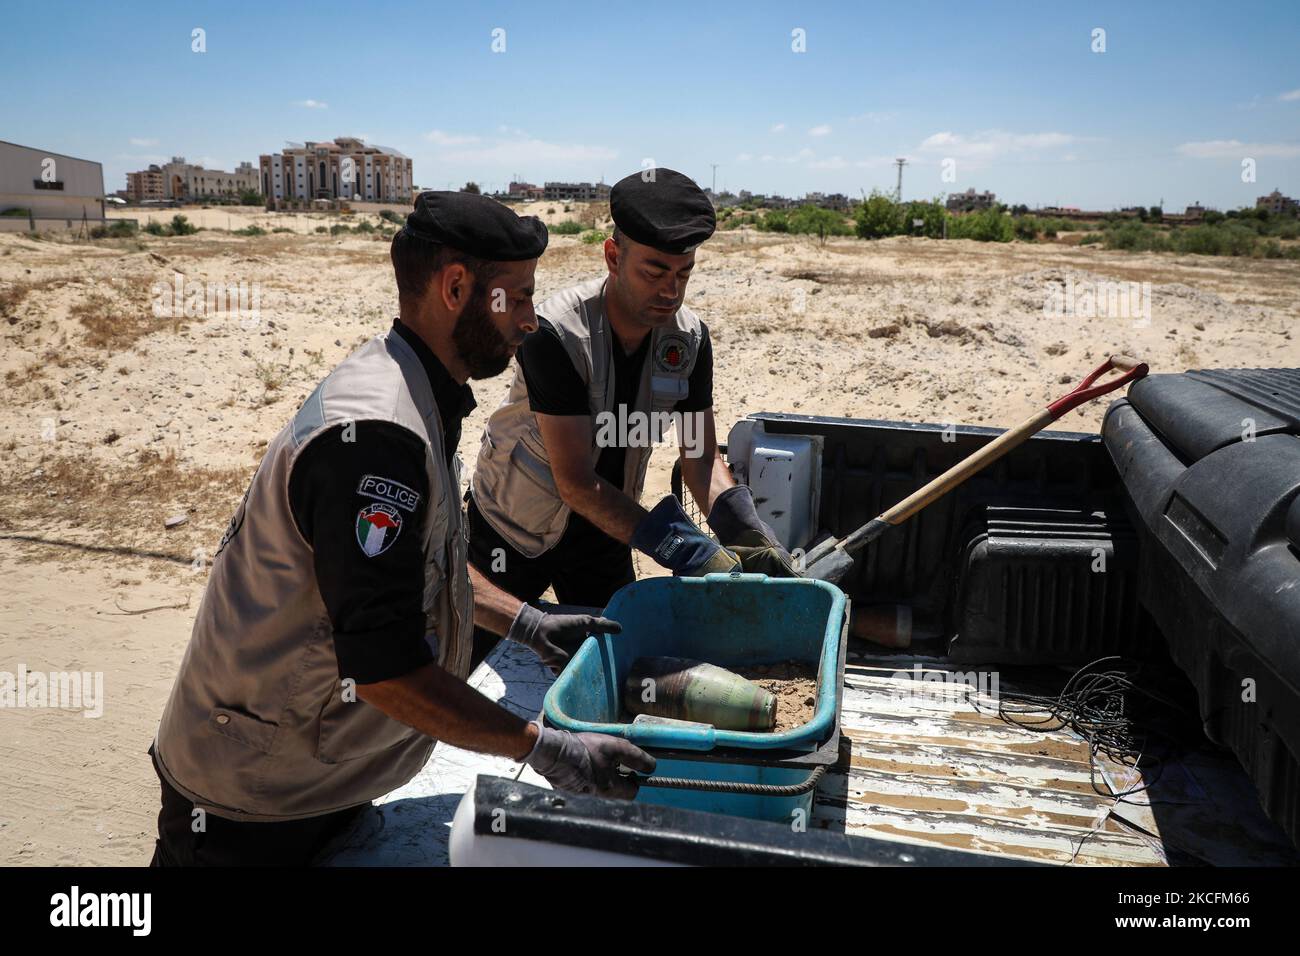 Explosives experts of Hamas stow away in the back of a vehicle a collected unexploded projectile from the aftermath of the May 2021 conflict with Israel, in Khan Yunis in the southern Gaza Strip on June 5, 2021. (Photo by Majdi Fathi/NurPhoto) Stock Photo